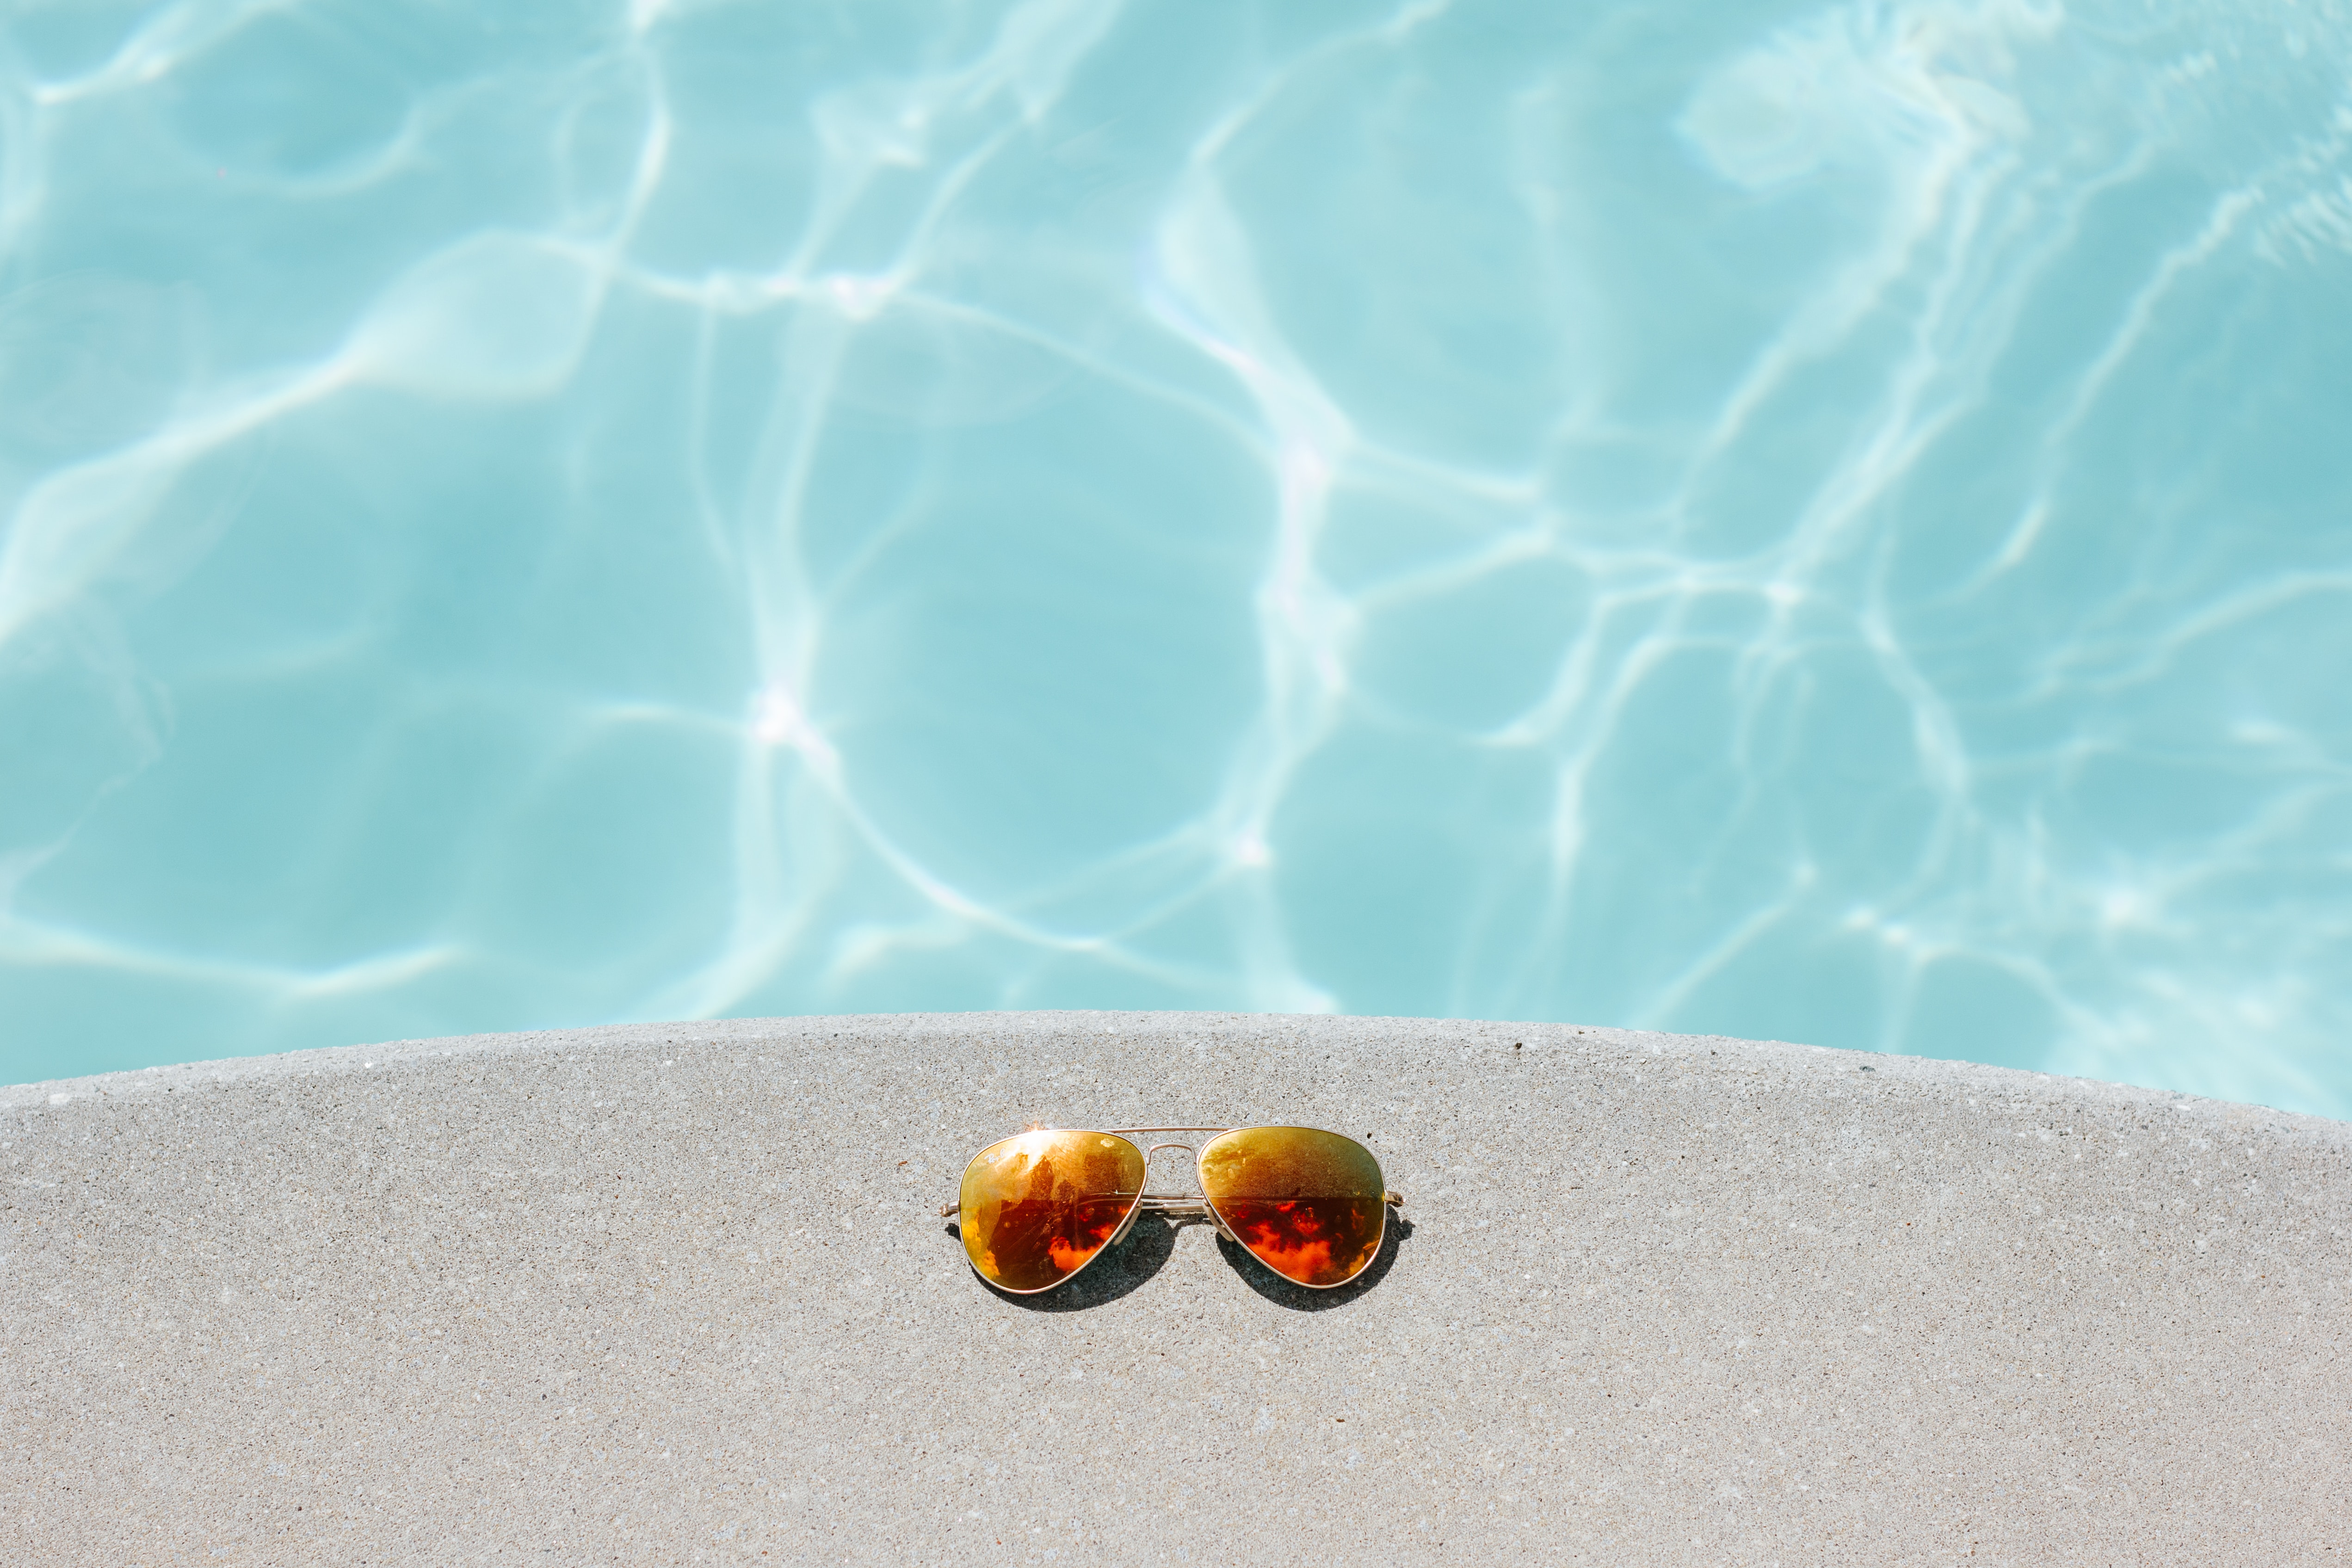 Image of sunglasses sitting on the ledge by the pool